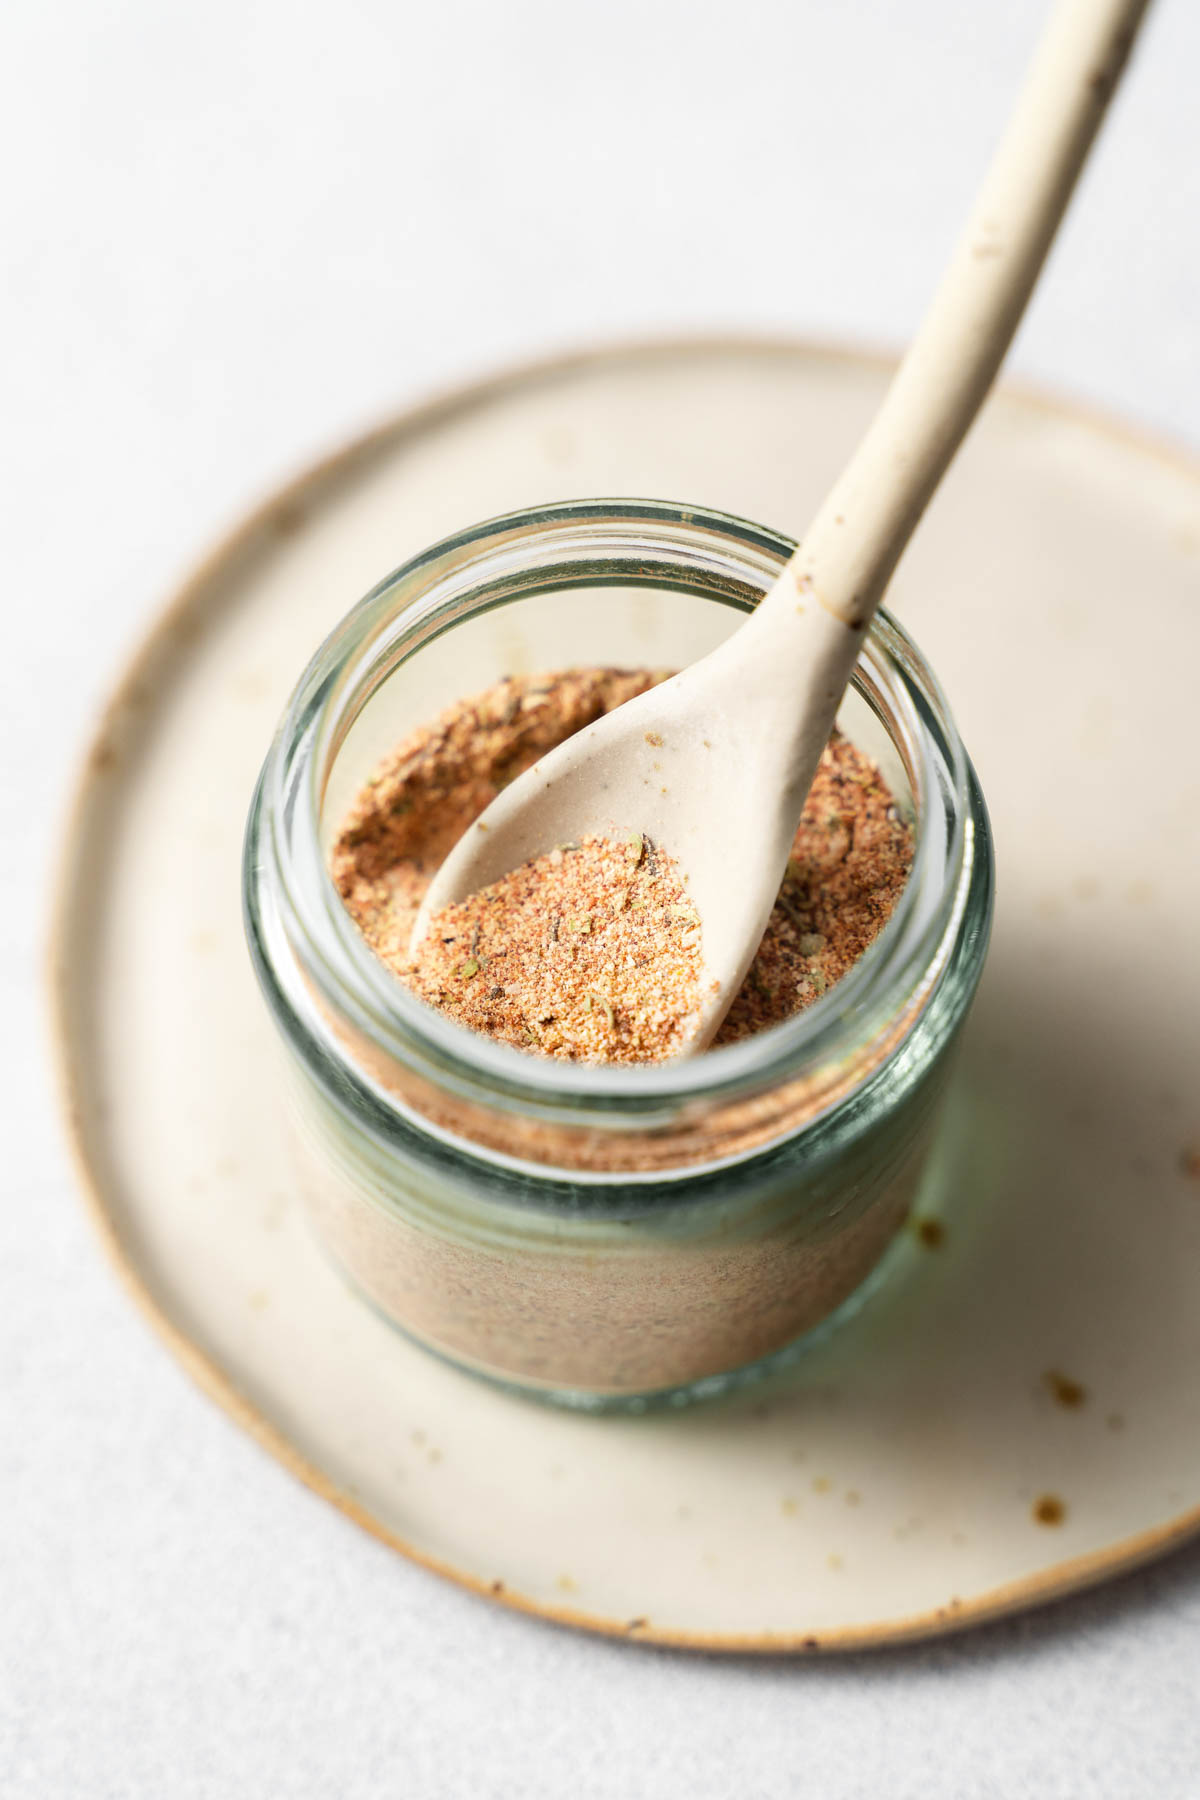 A close up image of a glass jar containing spices, with a spoon inserted into the spice blend.